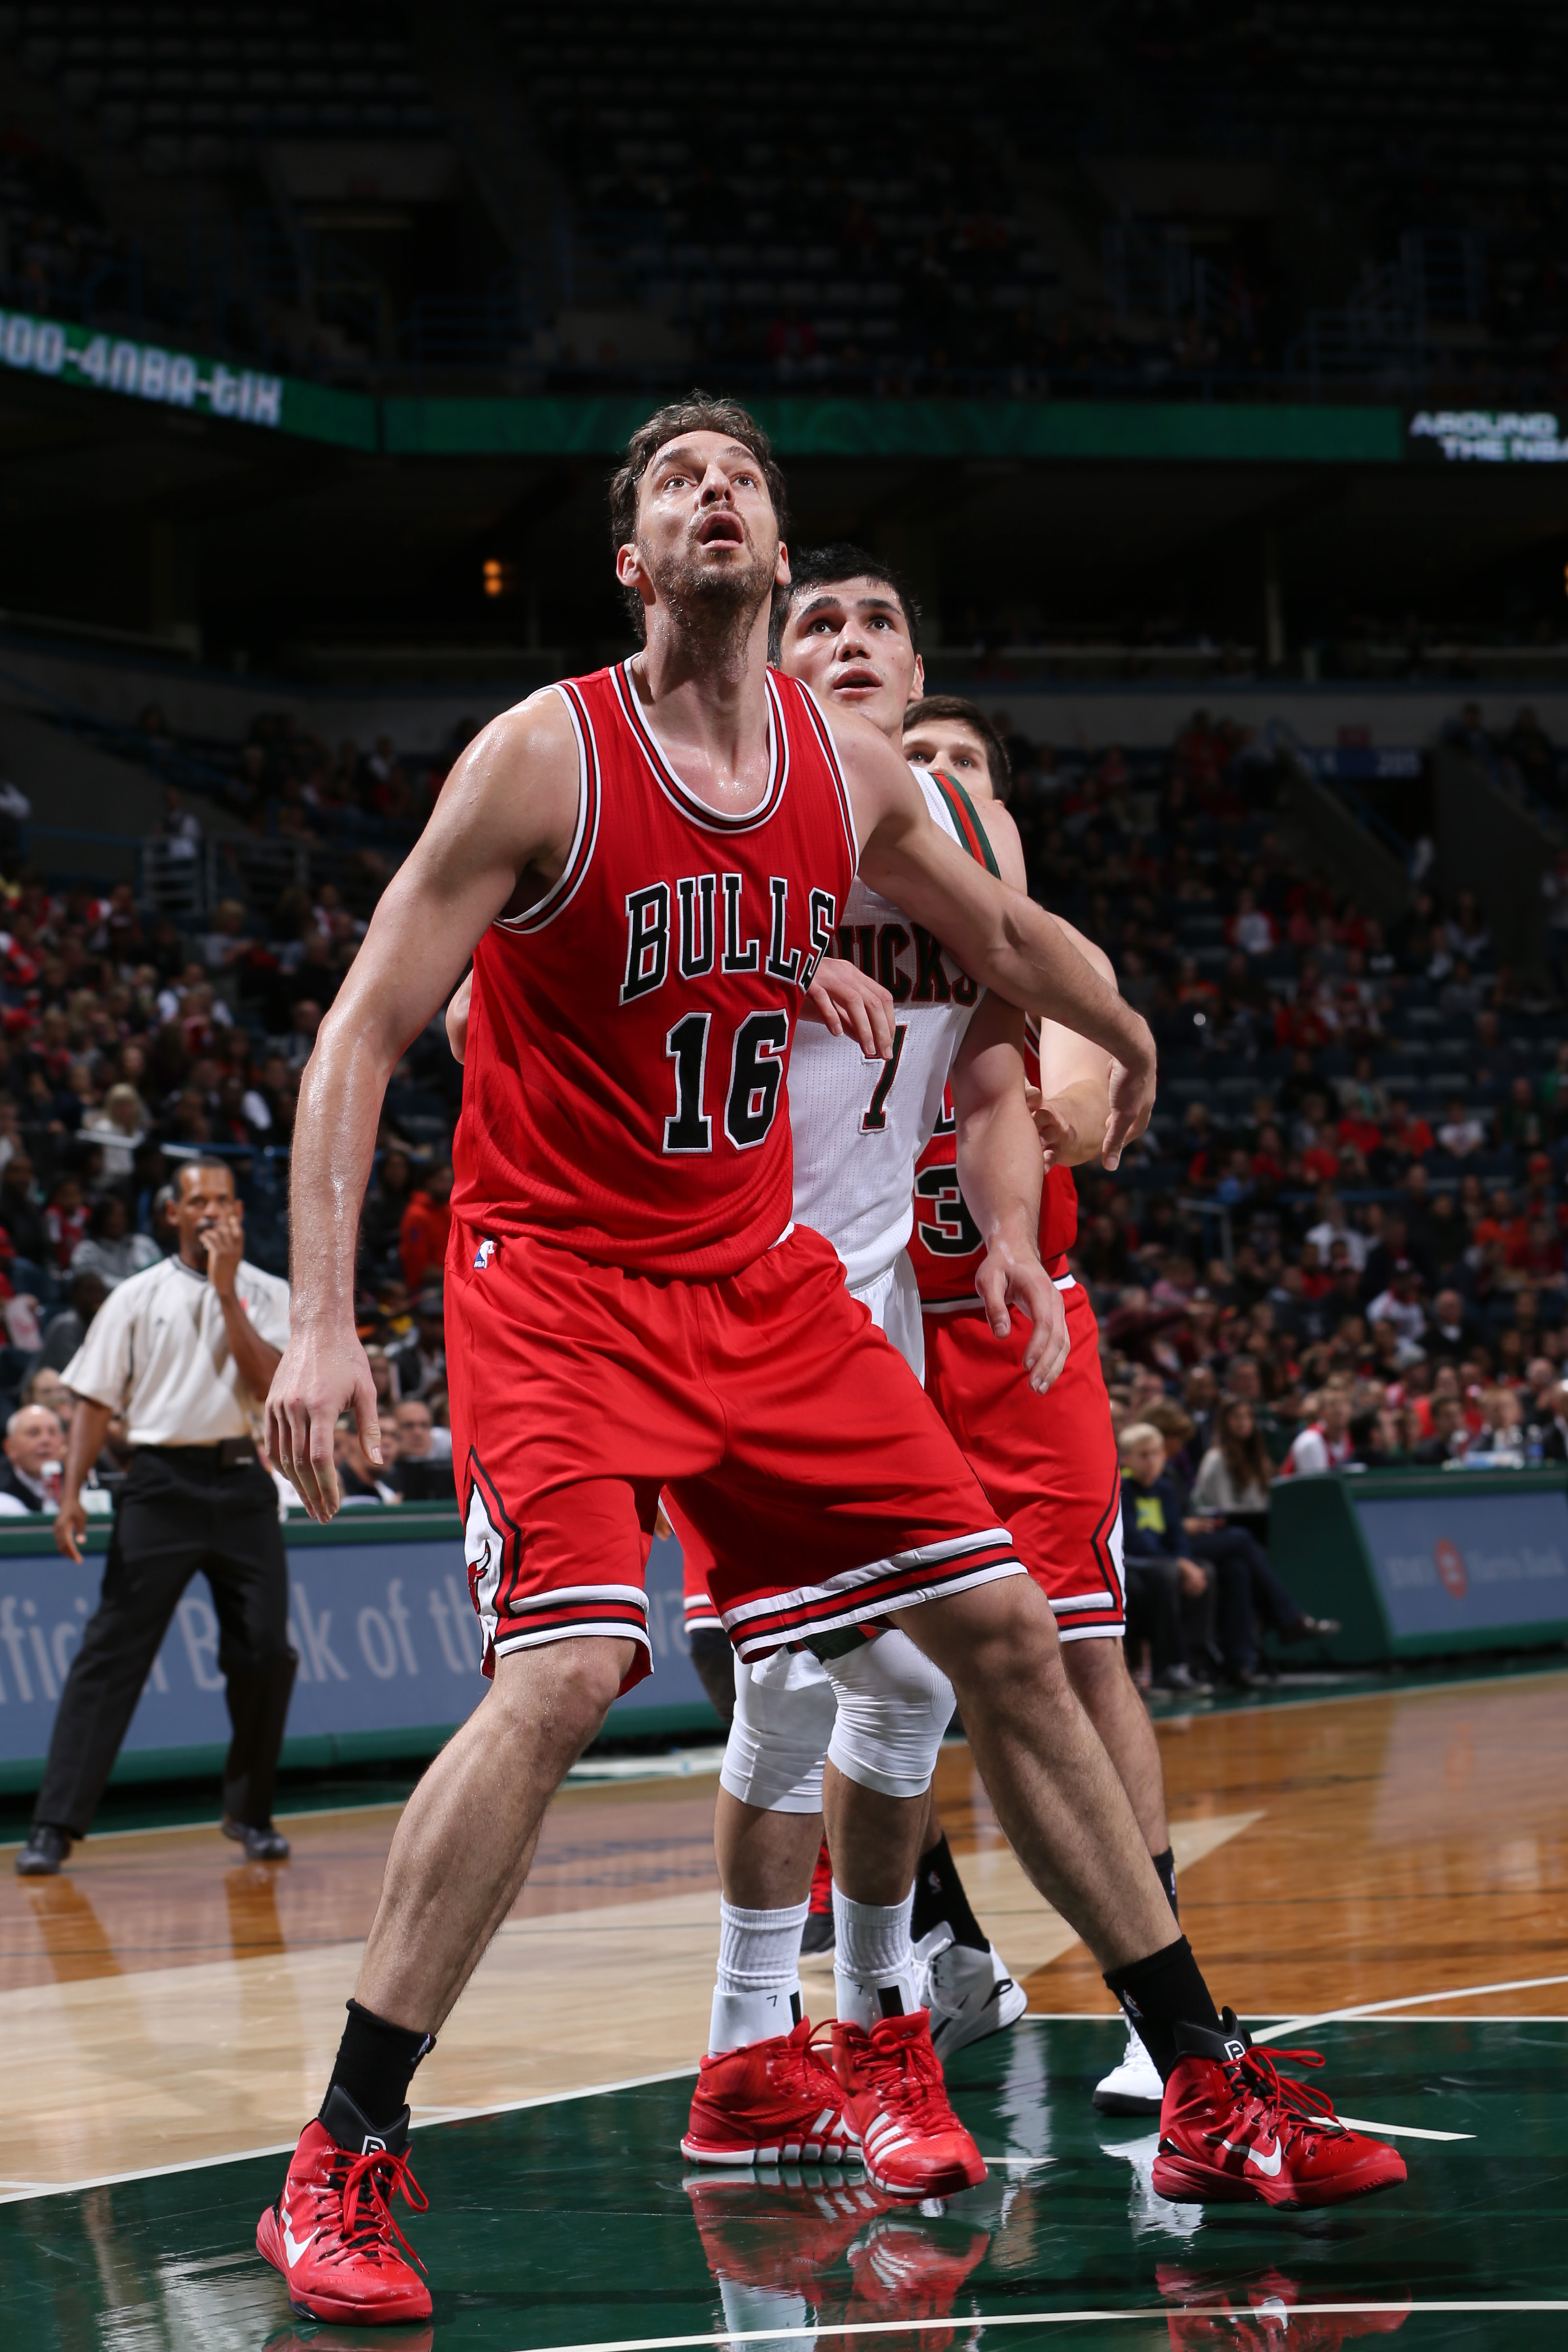 MILWAUKEE, WI - OCTOBER 11: Â Pau Gasol #16 of the Chicago Bulls looks for the rebound against the Milwaukee Bucks during the game on October 11, 2014 at BMO Harris Bradley Center, Milwaukee, Wisconsin. (Photo by Gary Dineen/NBAE via Getty Images)